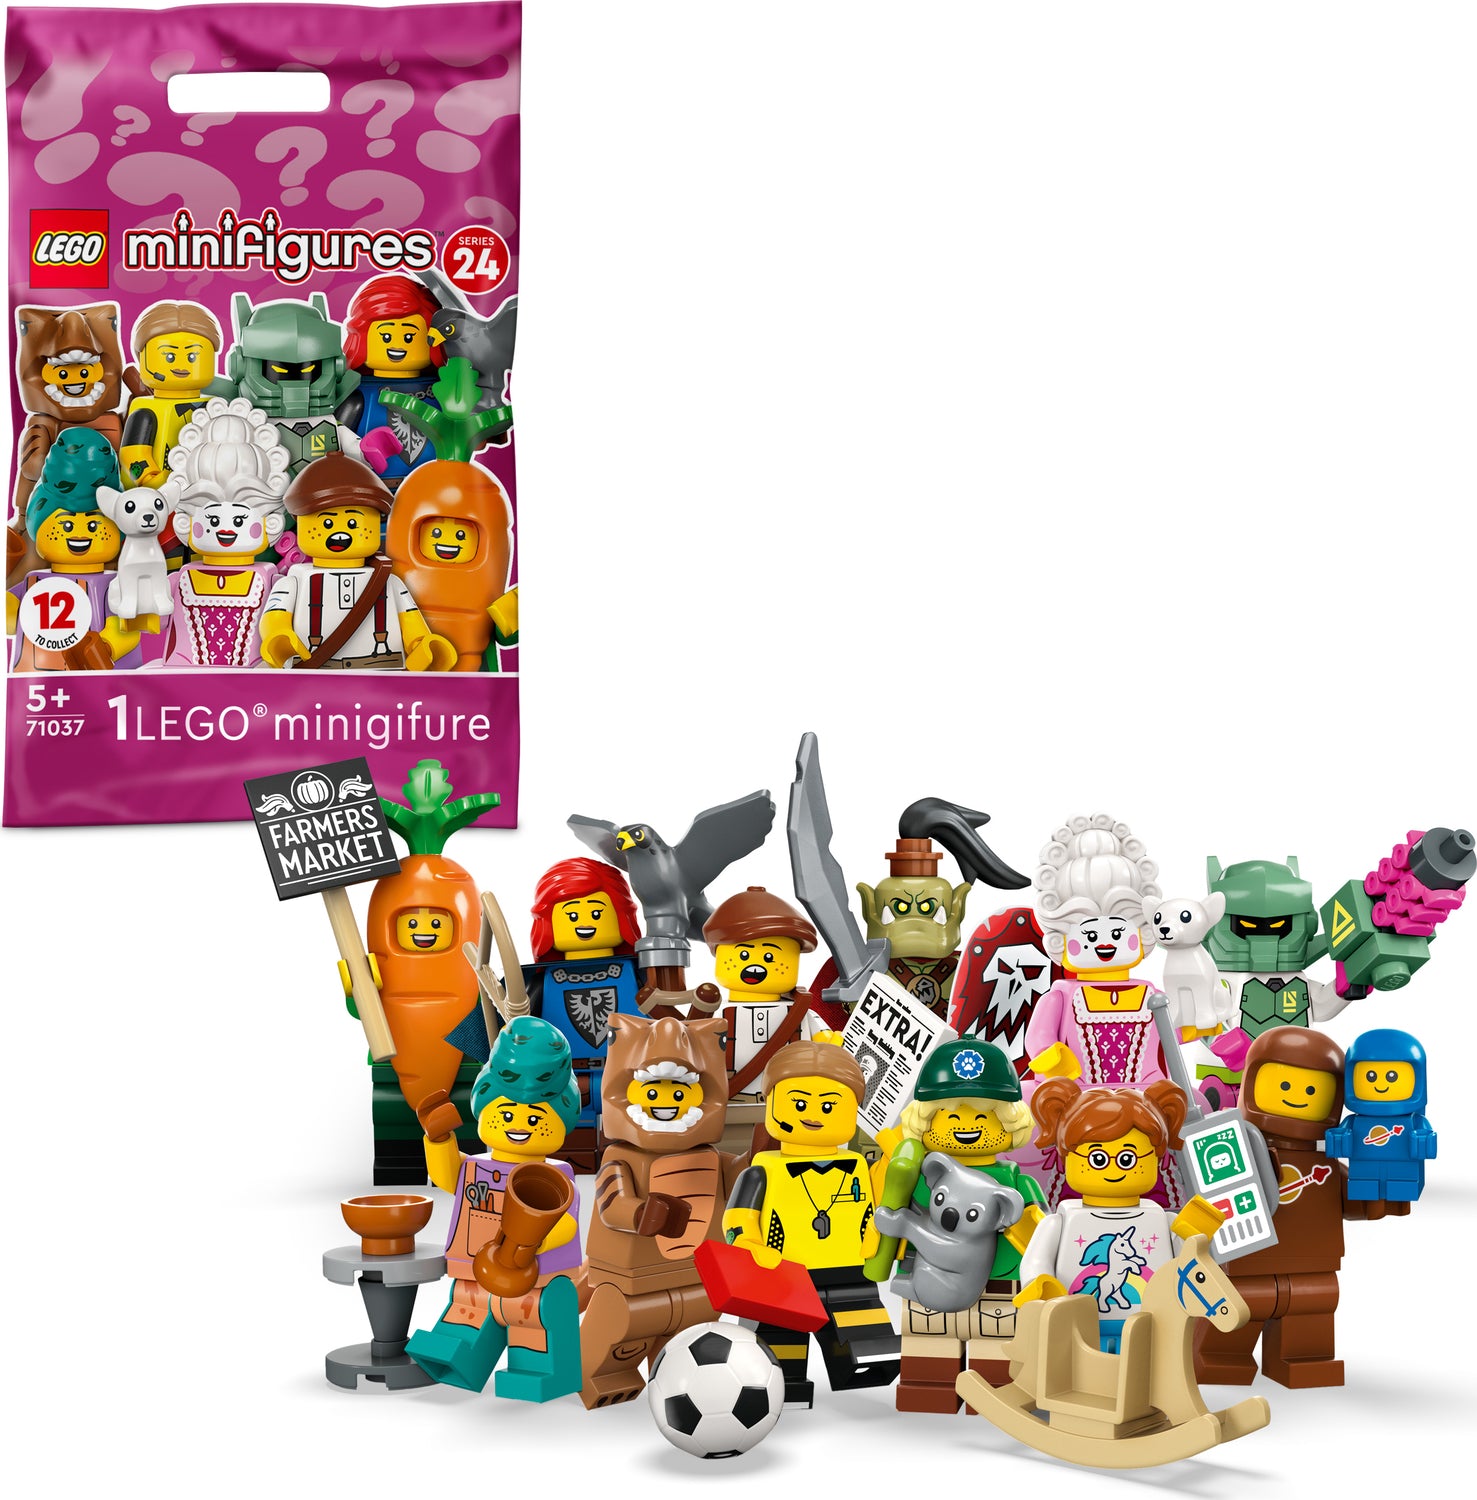 LEGO® Minifigures Series 24 (assorted blind bags)